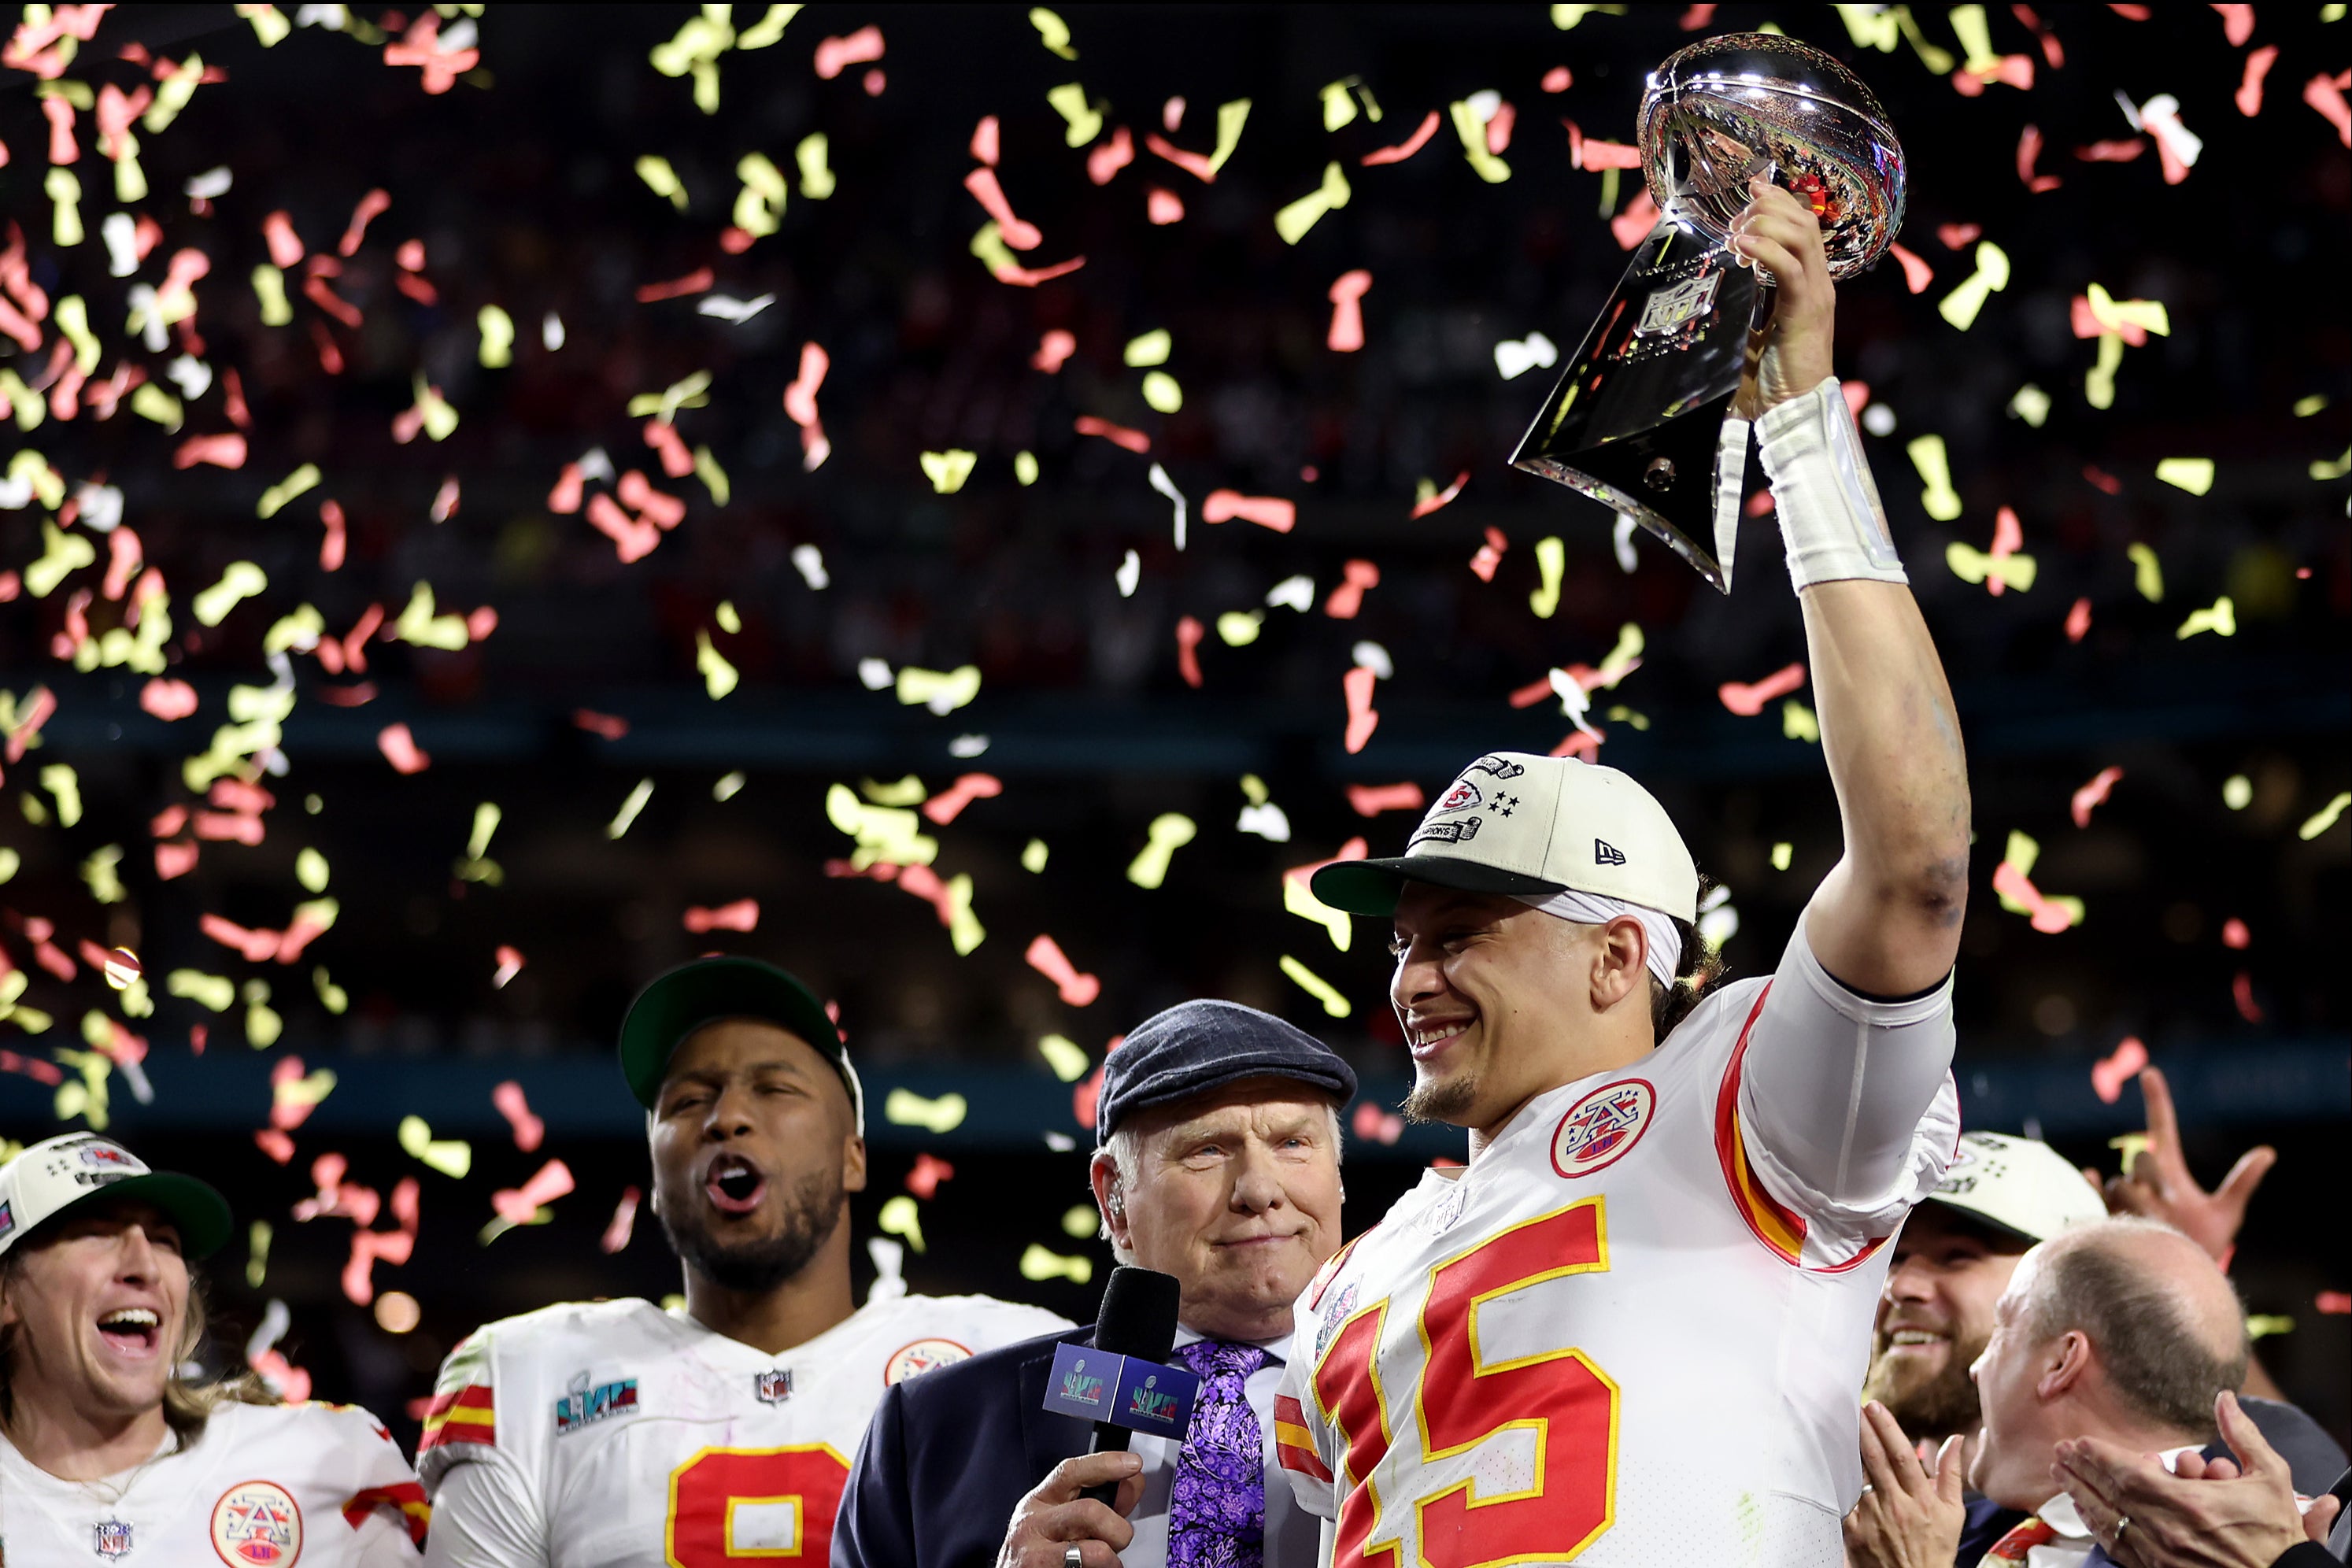 Patrick Mahomes will bid for back-to-back Lombardi Trophy wins